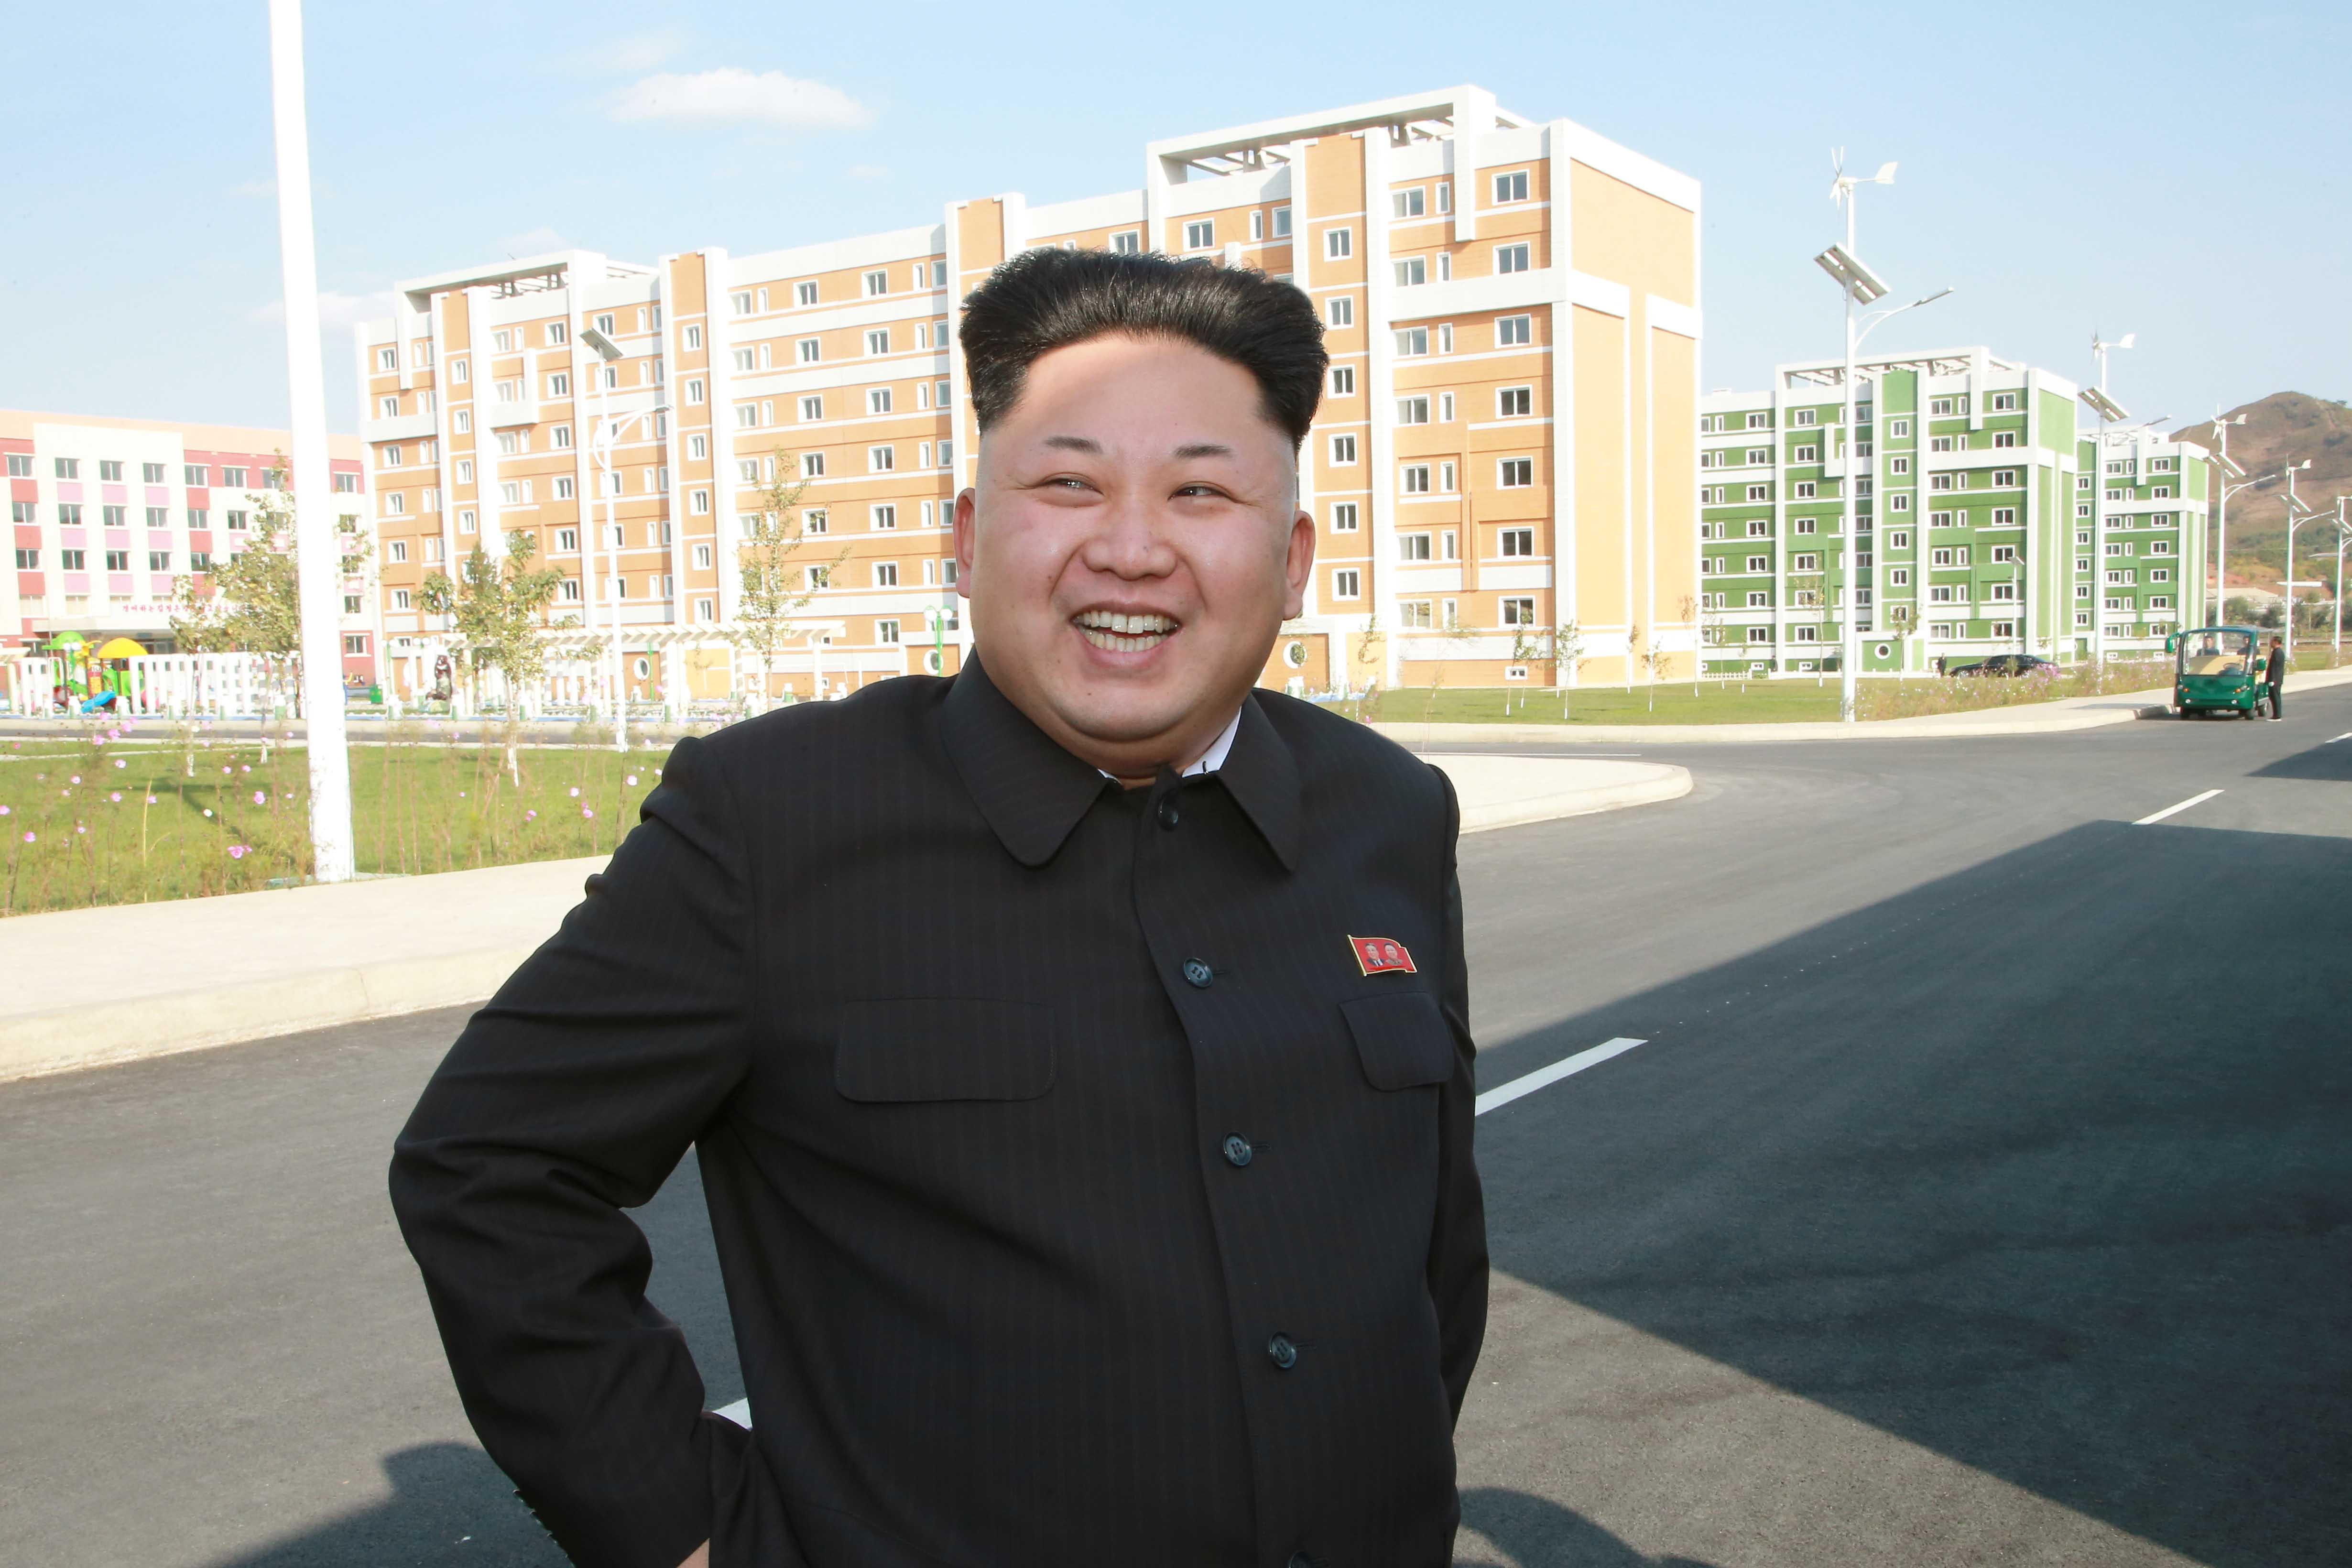 Tight jeans, dyed hair forbidden as North Korea cracks down on